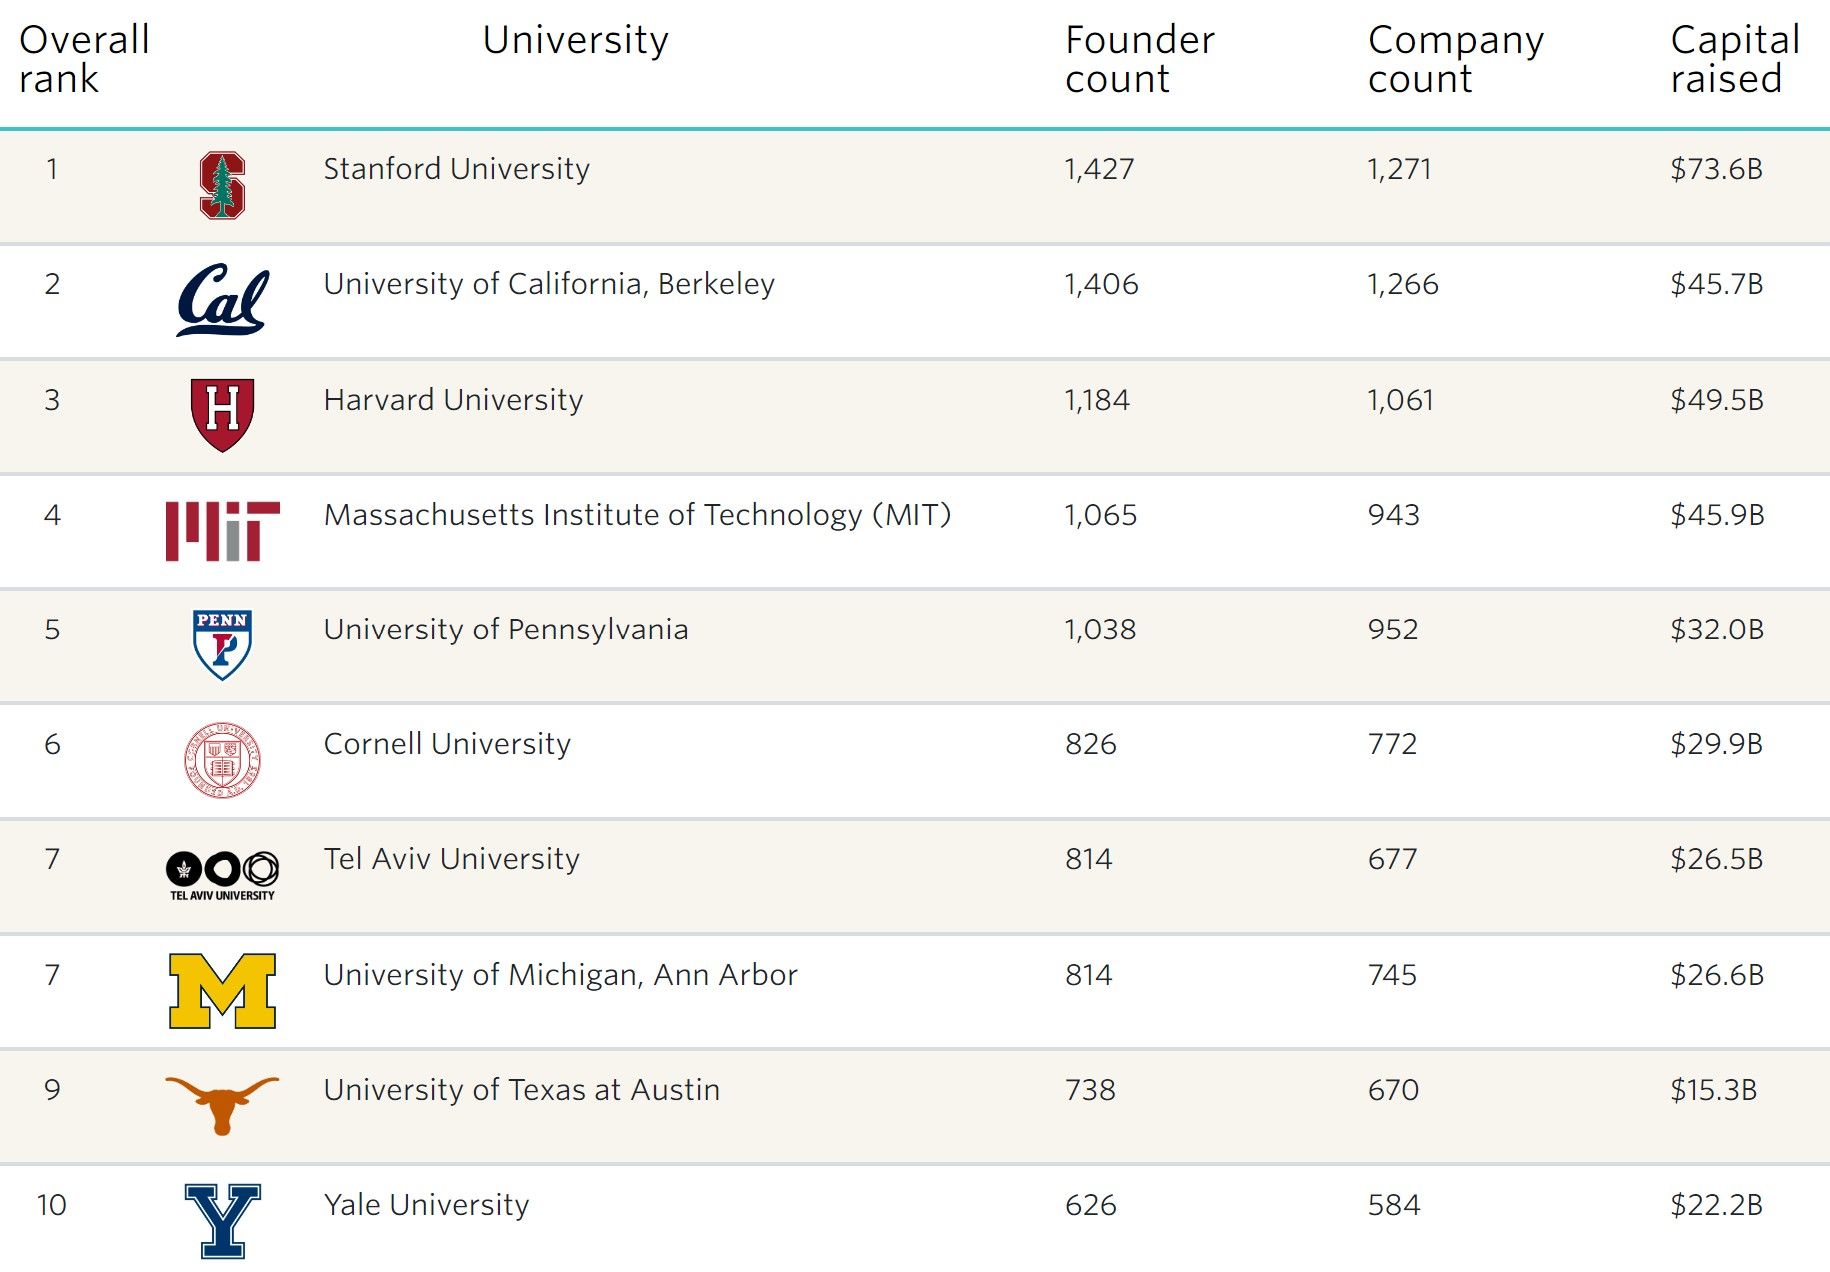 PitchBook chart on university founders